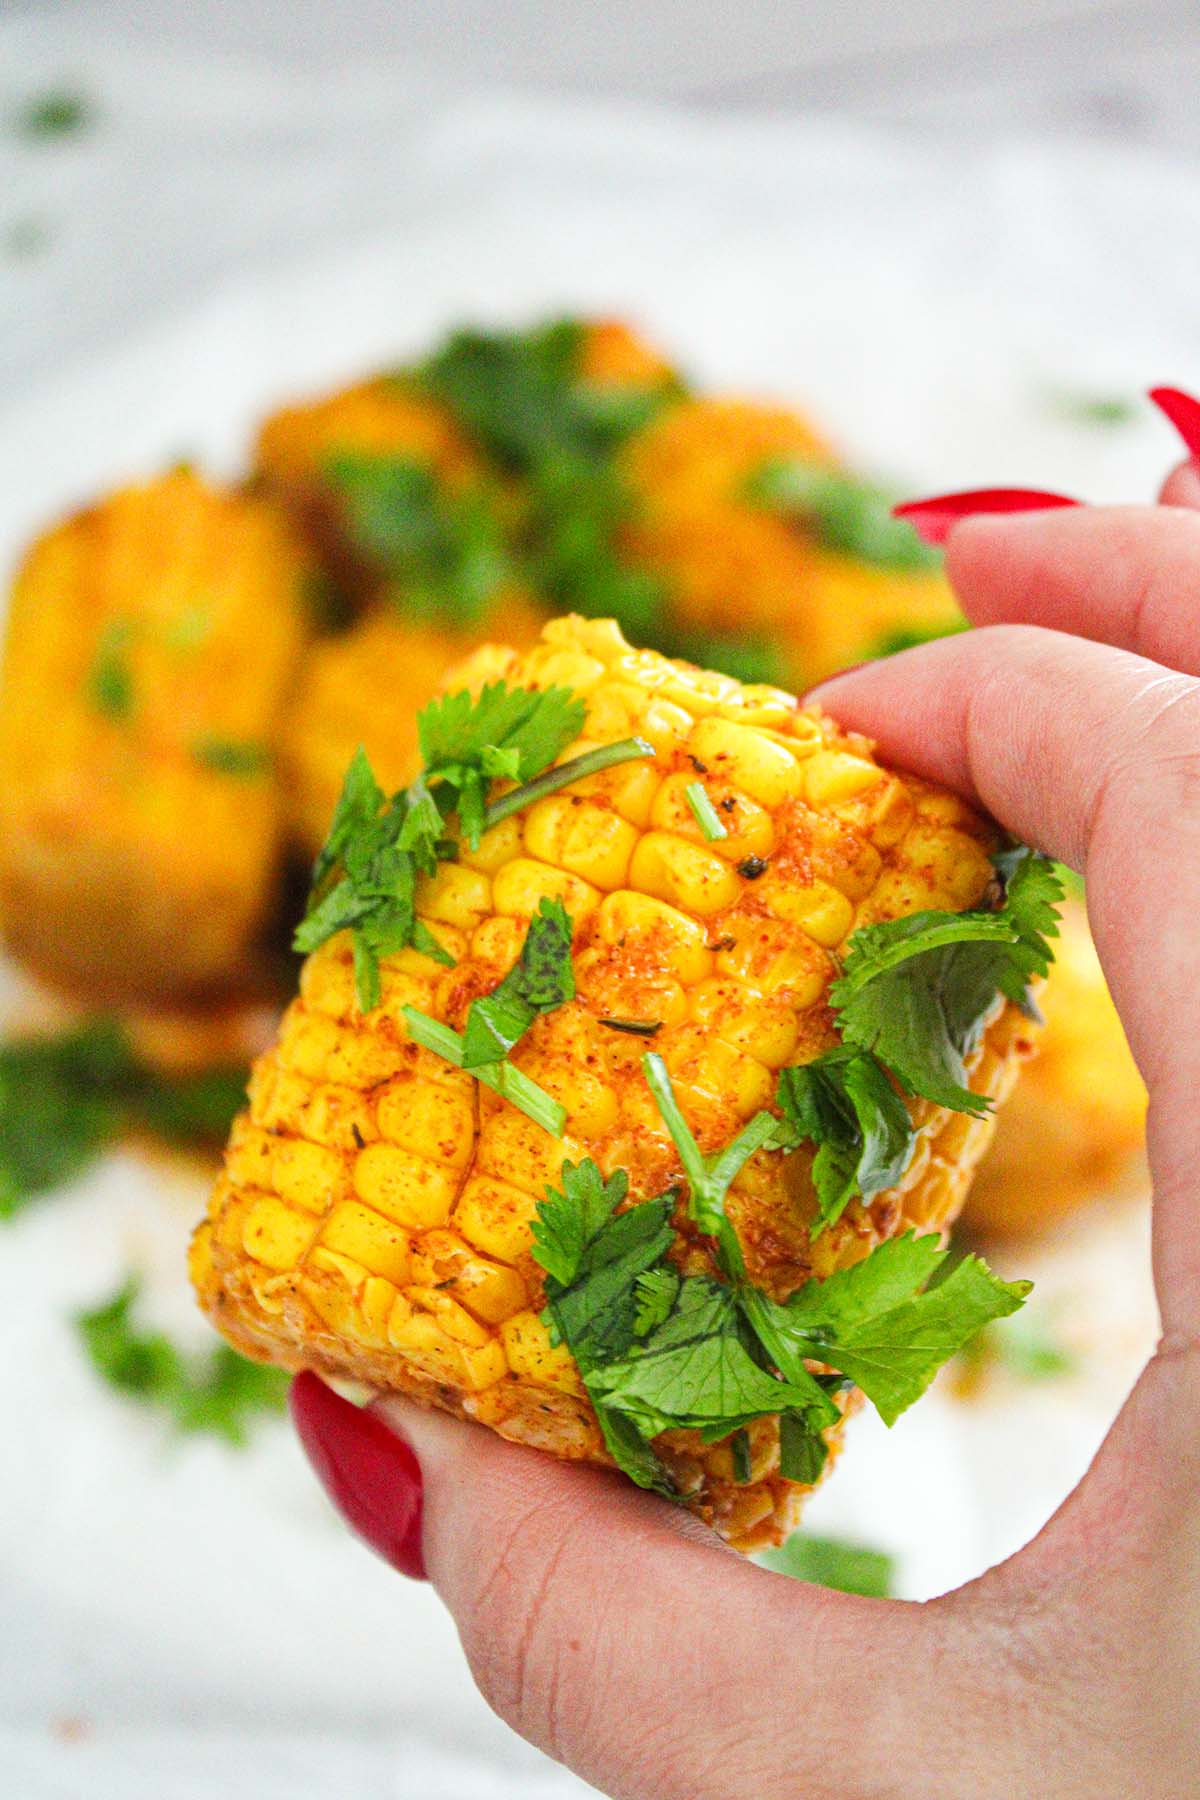 How to make cajun corn for any event